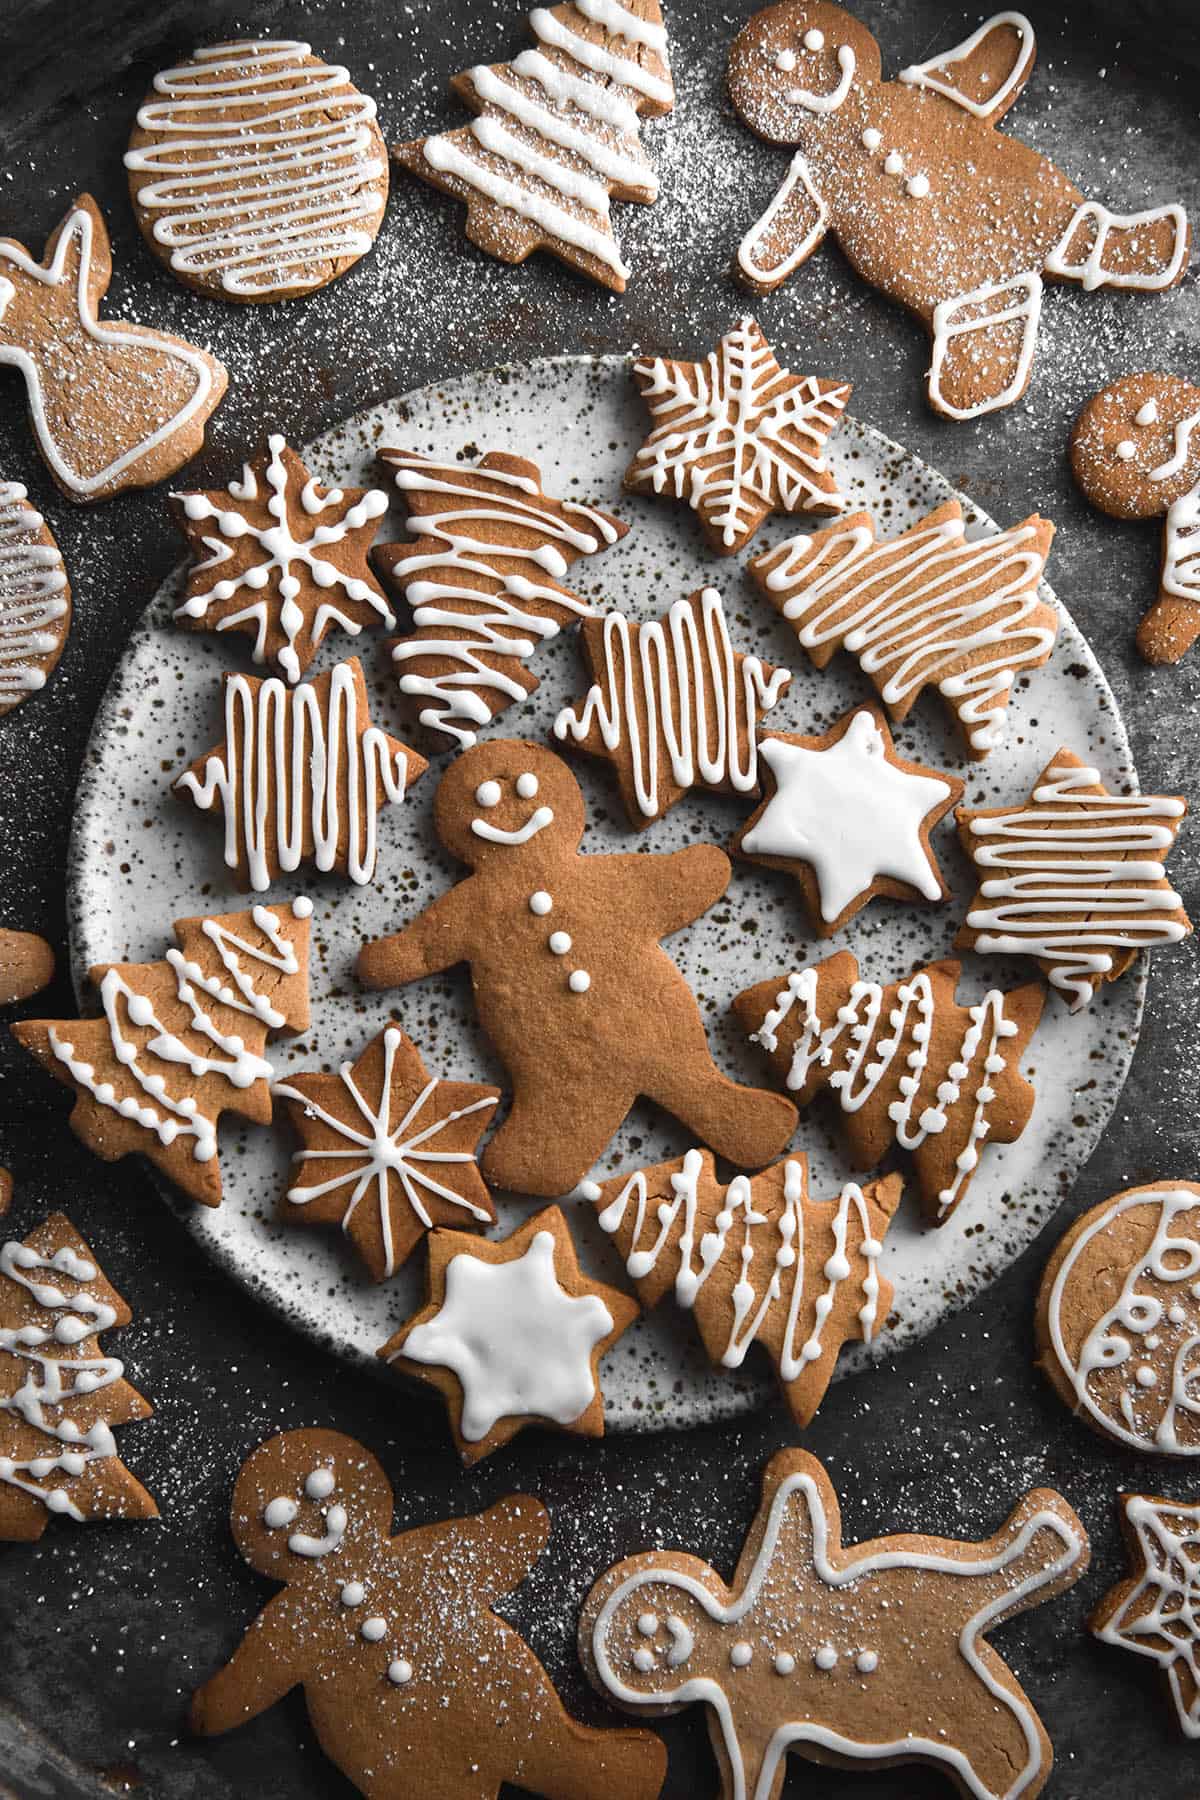 An aerial image of a gluten free gingerbreads decorated with white icing. The gingerbread around the edge of the image sit atop a dark steel backdrop and are sprinkled by extra icing sugar. A white speckled ceramic plate sits in the middle of the image topped with the remaining gingerbread